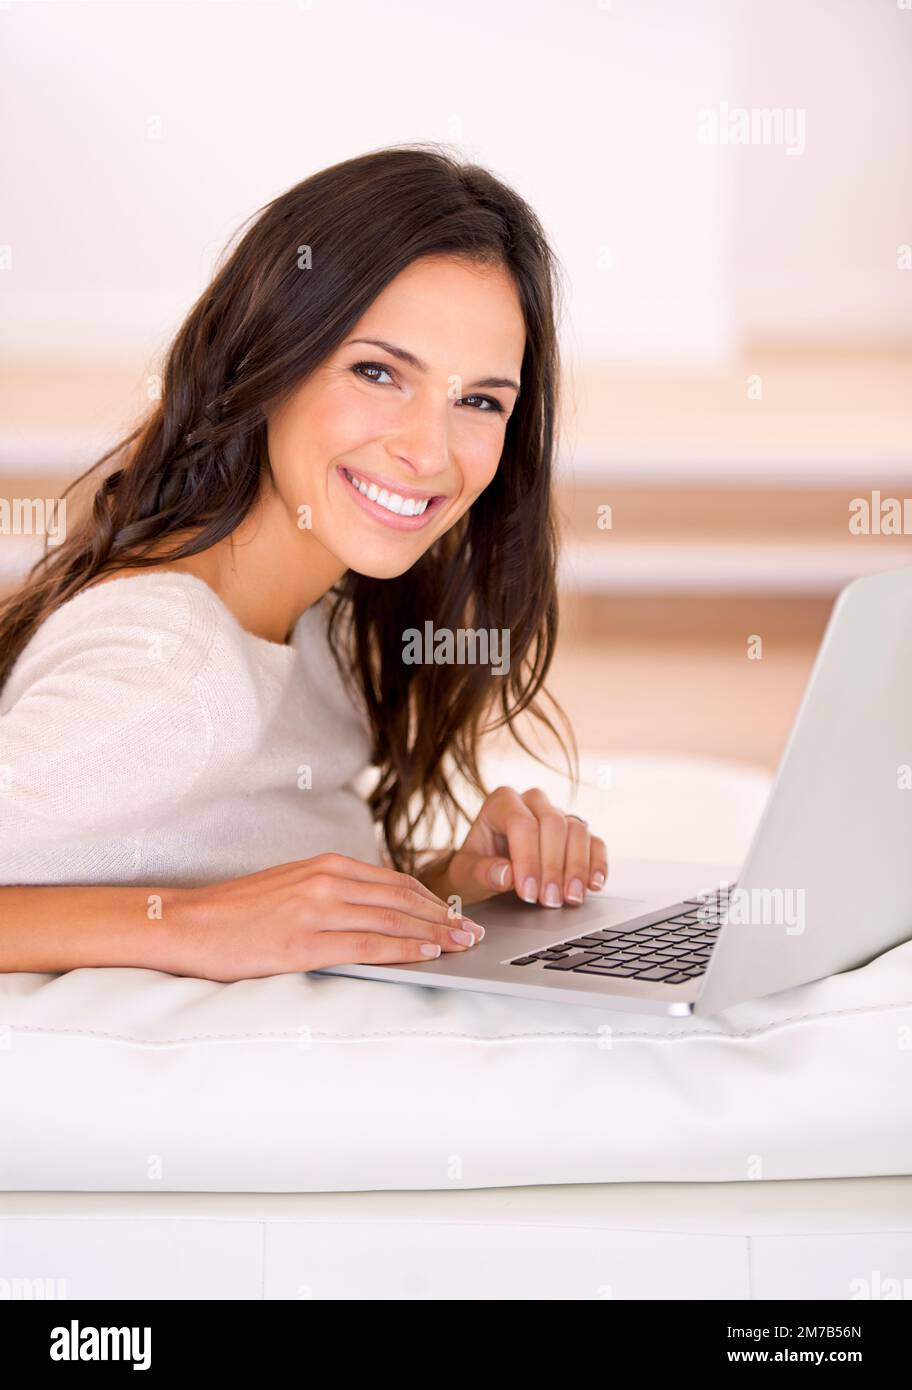 Keeping up with the latest chatter. a gorgeous young woman on a couch. Stock Photo